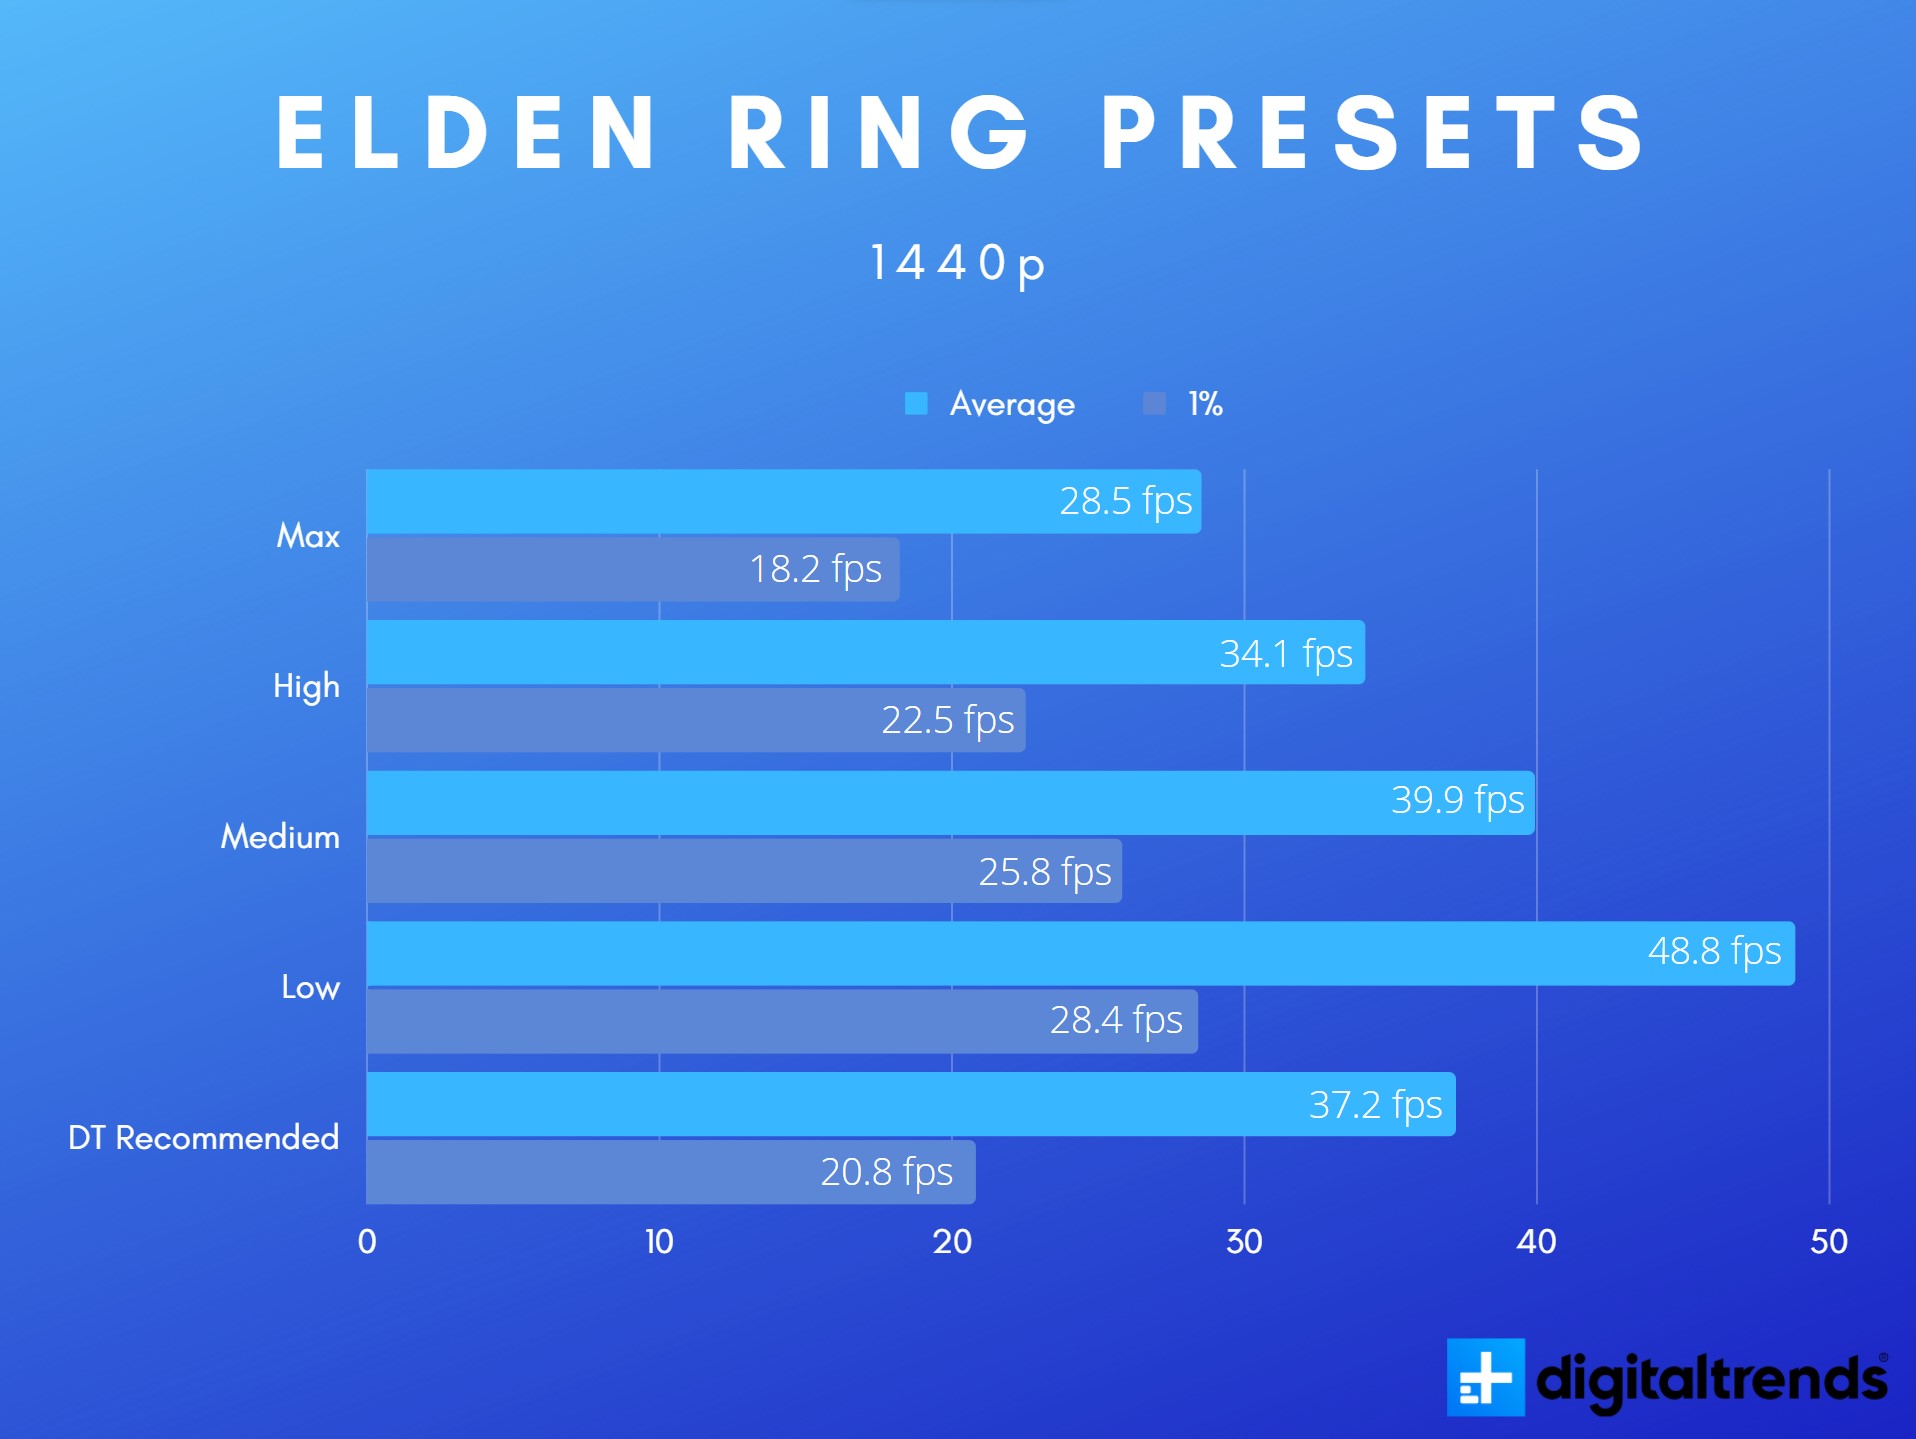 Elden Ring System Requirements and Features: What to Expect?